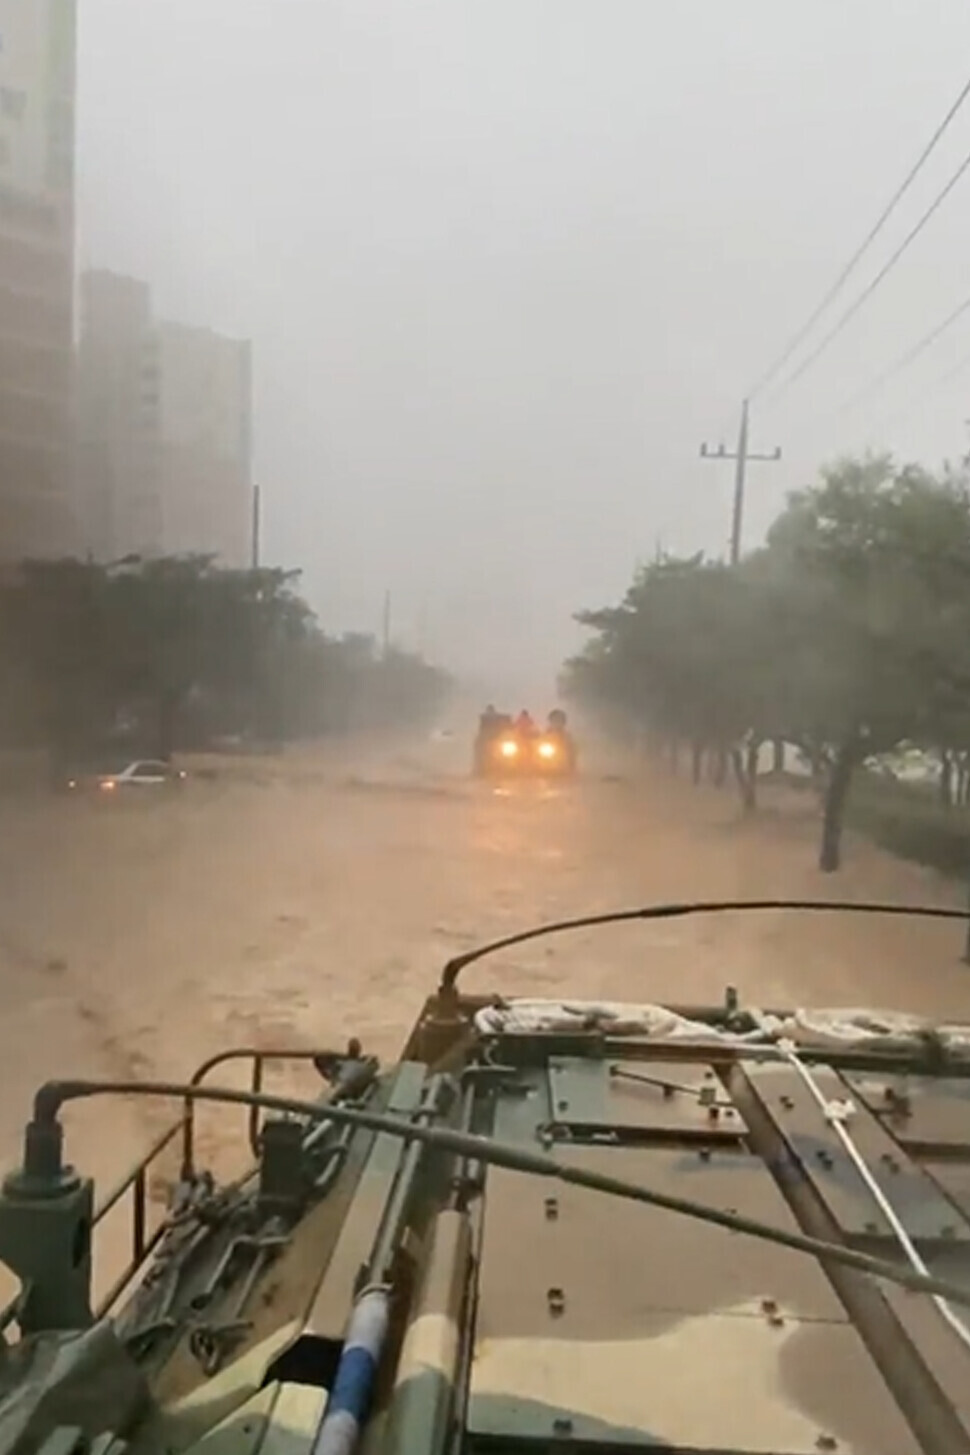 Korea’s 1st Marine Division mobilized two amphibious assault vehicles in the Cheongnim neighborhood of Nam District in Pohang, North Gyeongsang Province, in the early hours of Sept. 6 after a flood warning was issued due to Typhoon Hinnamnor and are seen here searching for residents stranded in the flood waters. (courtesy 1st Marine Division)